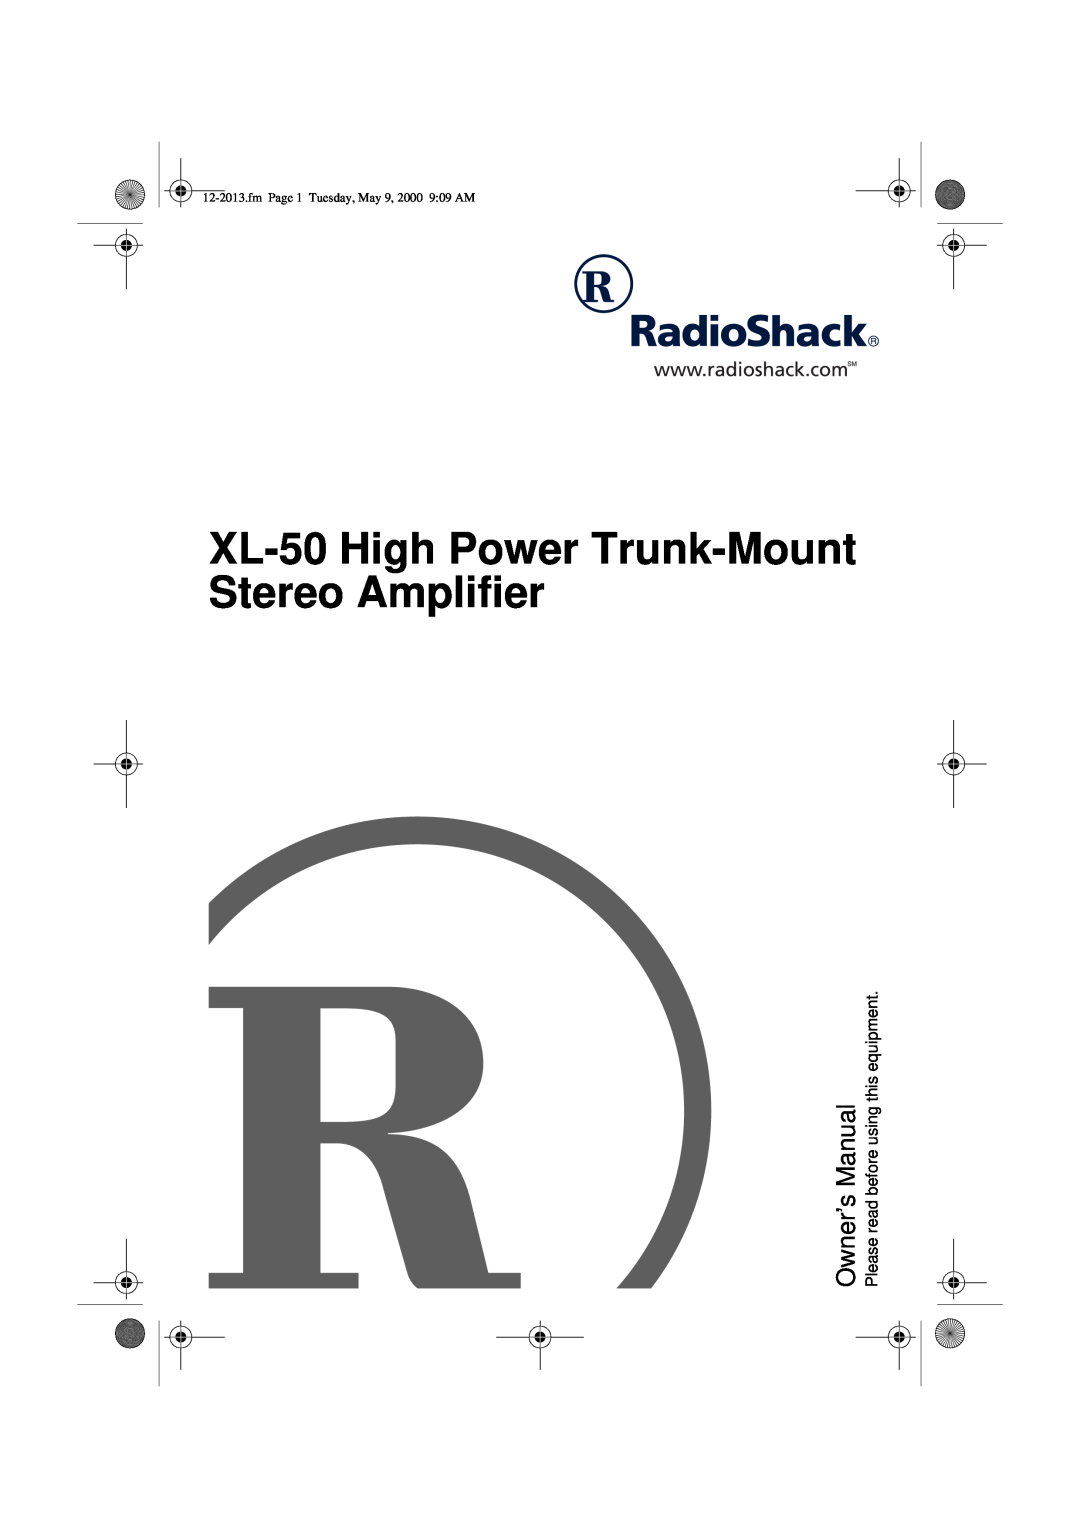 Radio Shack owner manual XL-50High Power Trunk-MountStereo Amplifier, fmPage 1 Tuesday, May 9, 2000 9 09 AM 